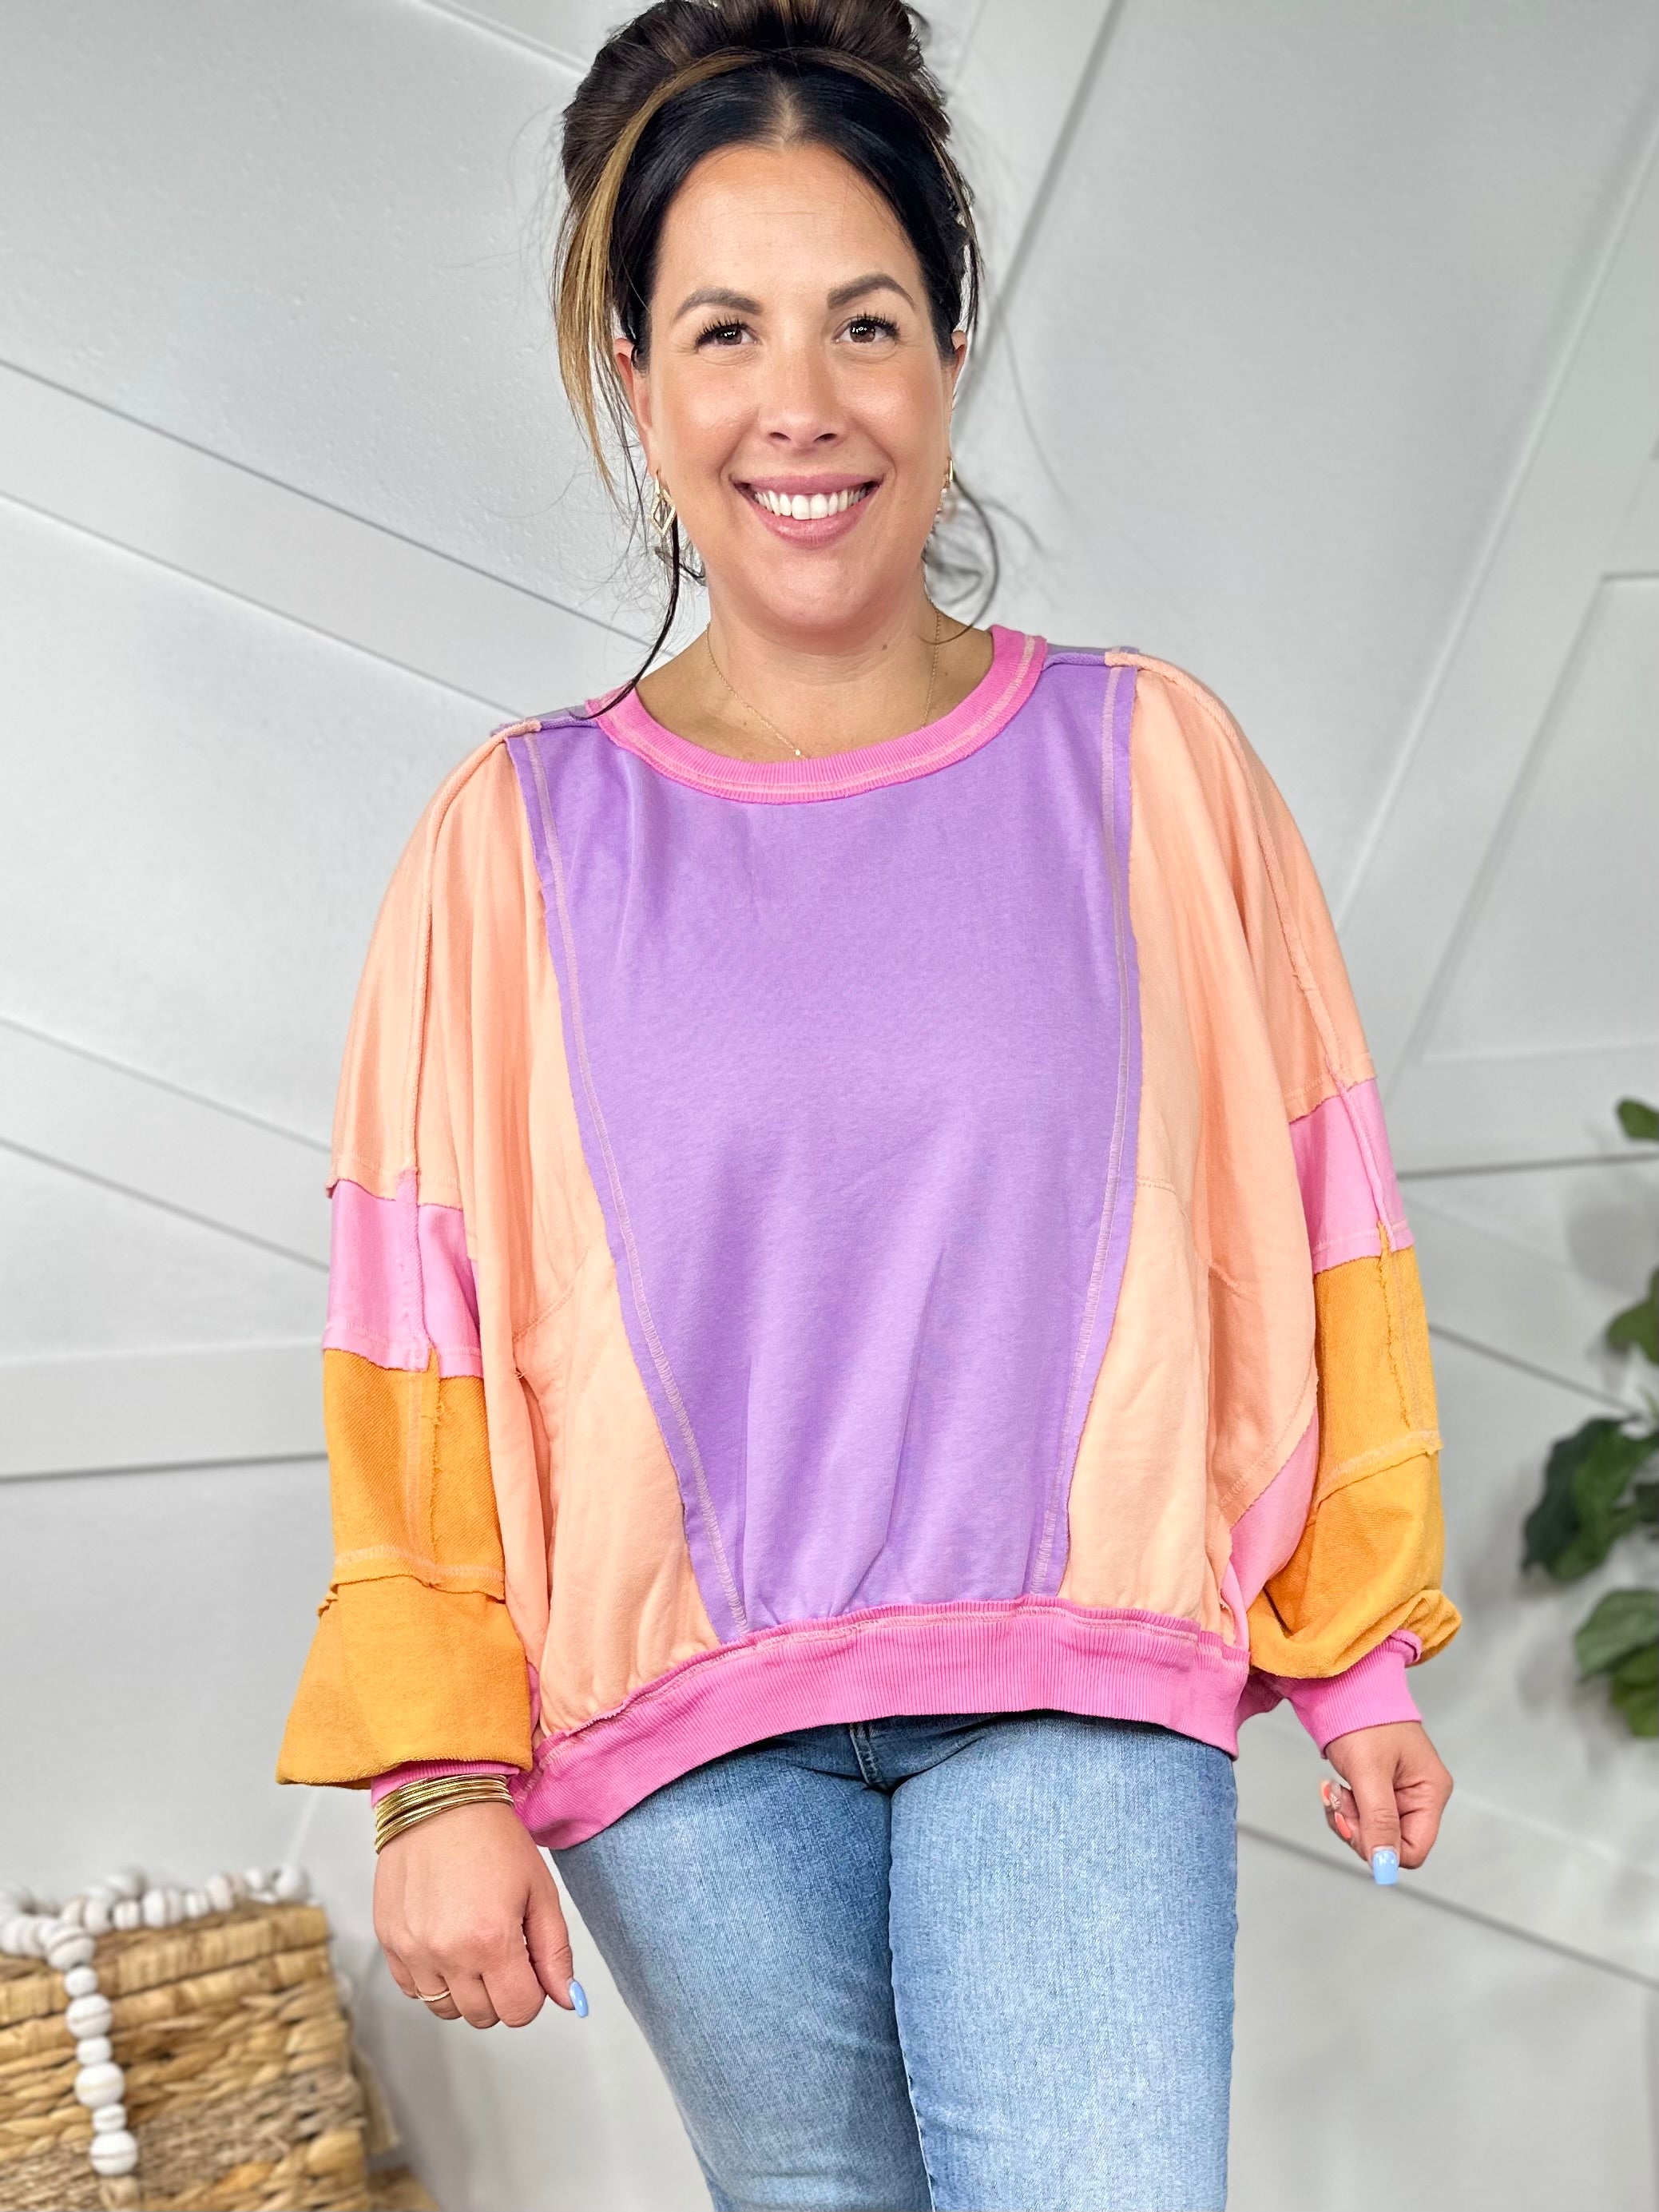 RESTOCK: Kickback Throwback Pullover Top-120 Long Sleeve Tops-Bibi-Heathered Boho Boutique, Women's Fashion and Accessories in Palmetto, FL